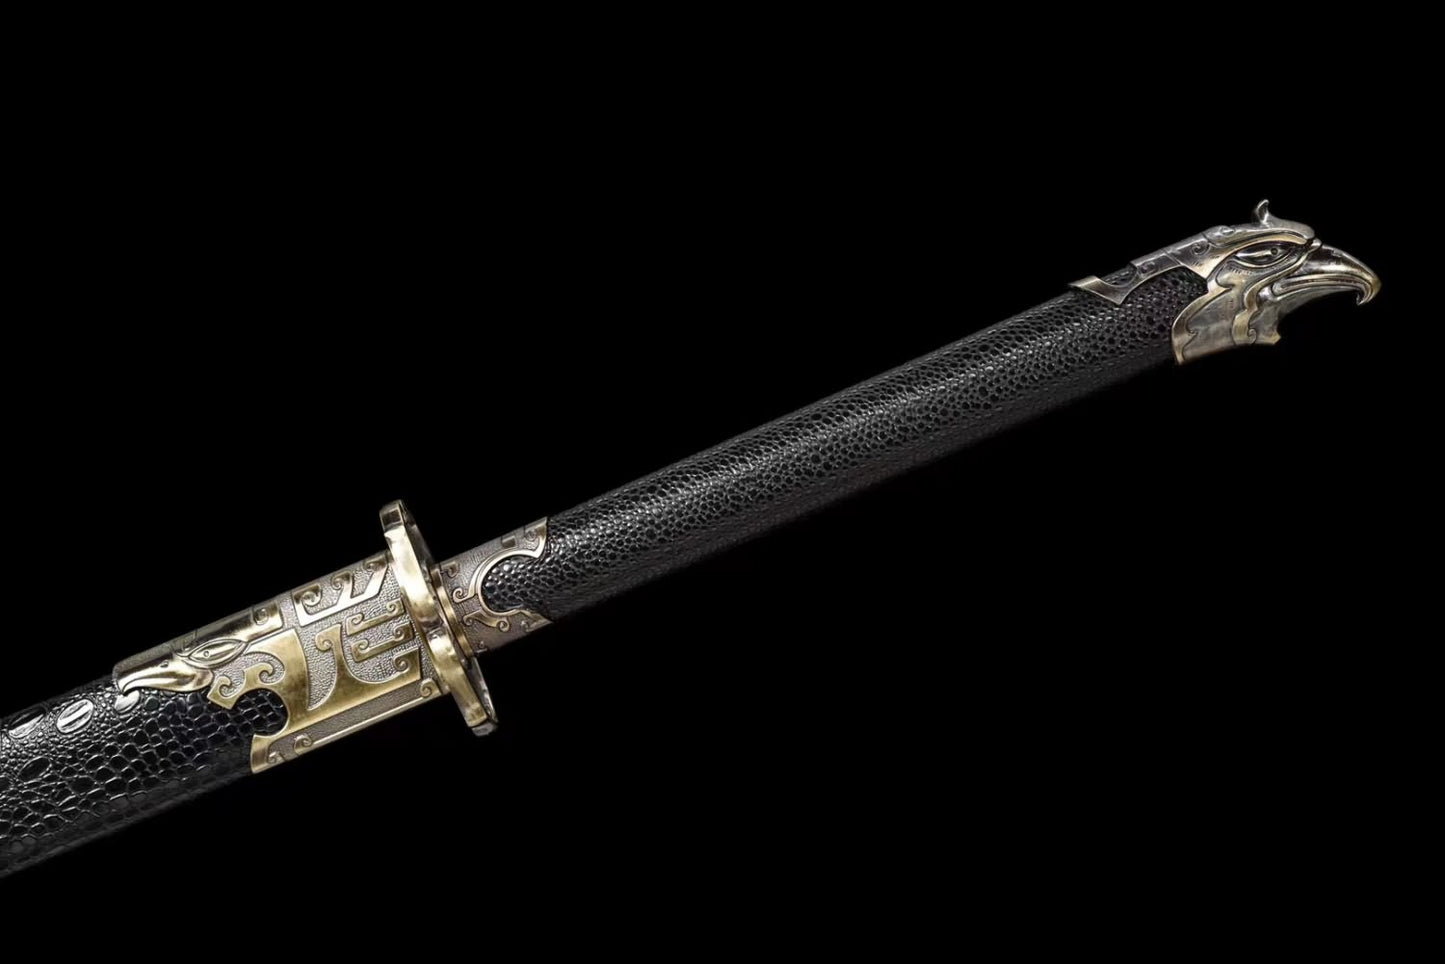 LOONGSWORD,Handmade Eagle Yanling dao Sword with Forged Golden Blade-PU Wood Scabbard and Alloy Fittings